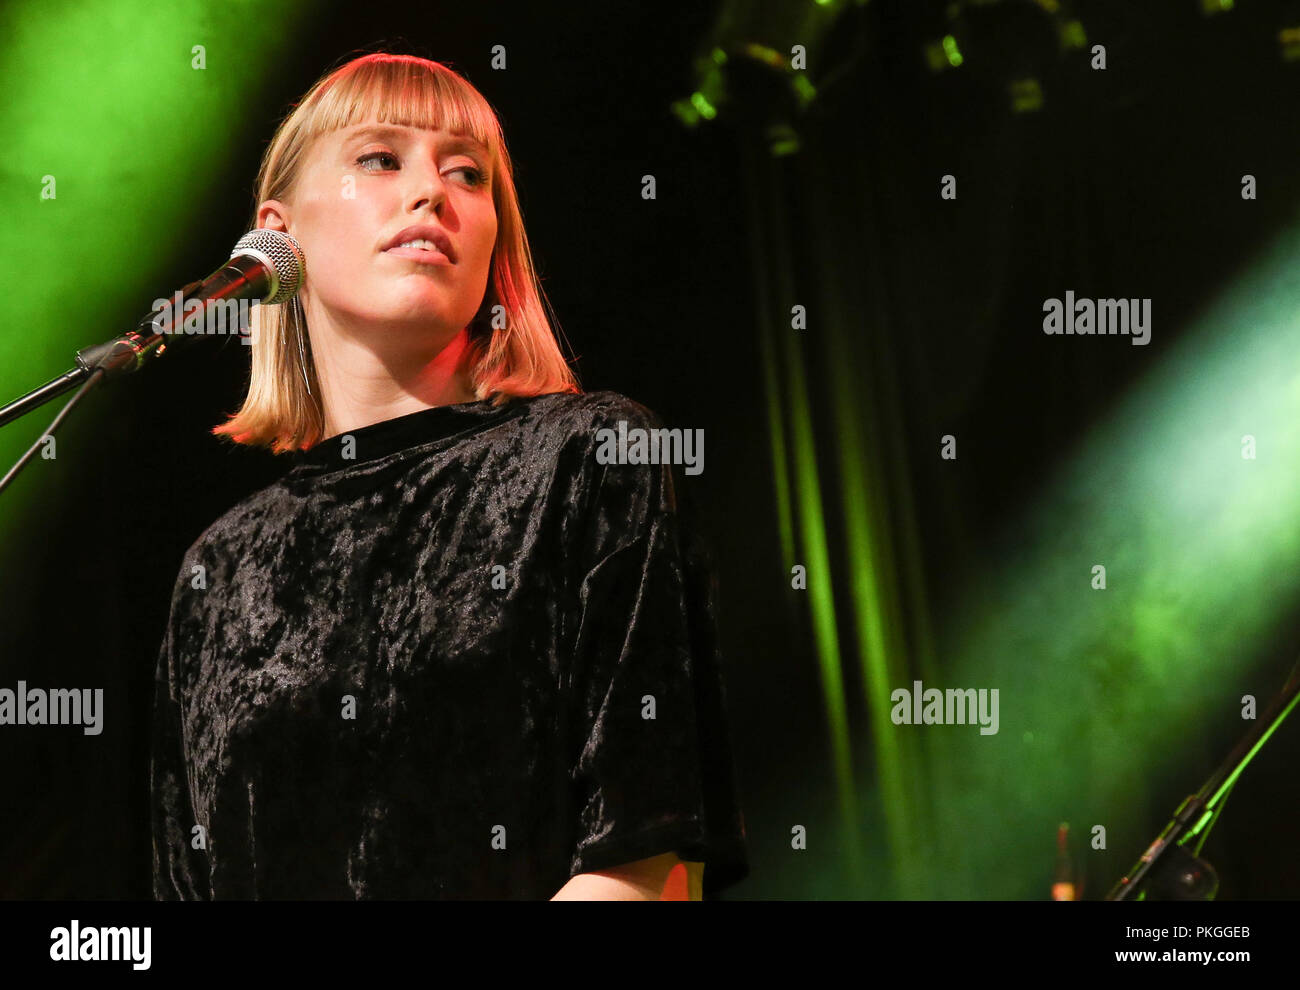 12 September 2018, Berlin: Singer Lea performing at the "YouTube Originals  Party" in the Festsaal Kreuzberg. YouTube Originals is the new paid  streaming service from YouTube. Photo: Carl Seidel/dpa-Zentralbild/ZB Stock  Photo -